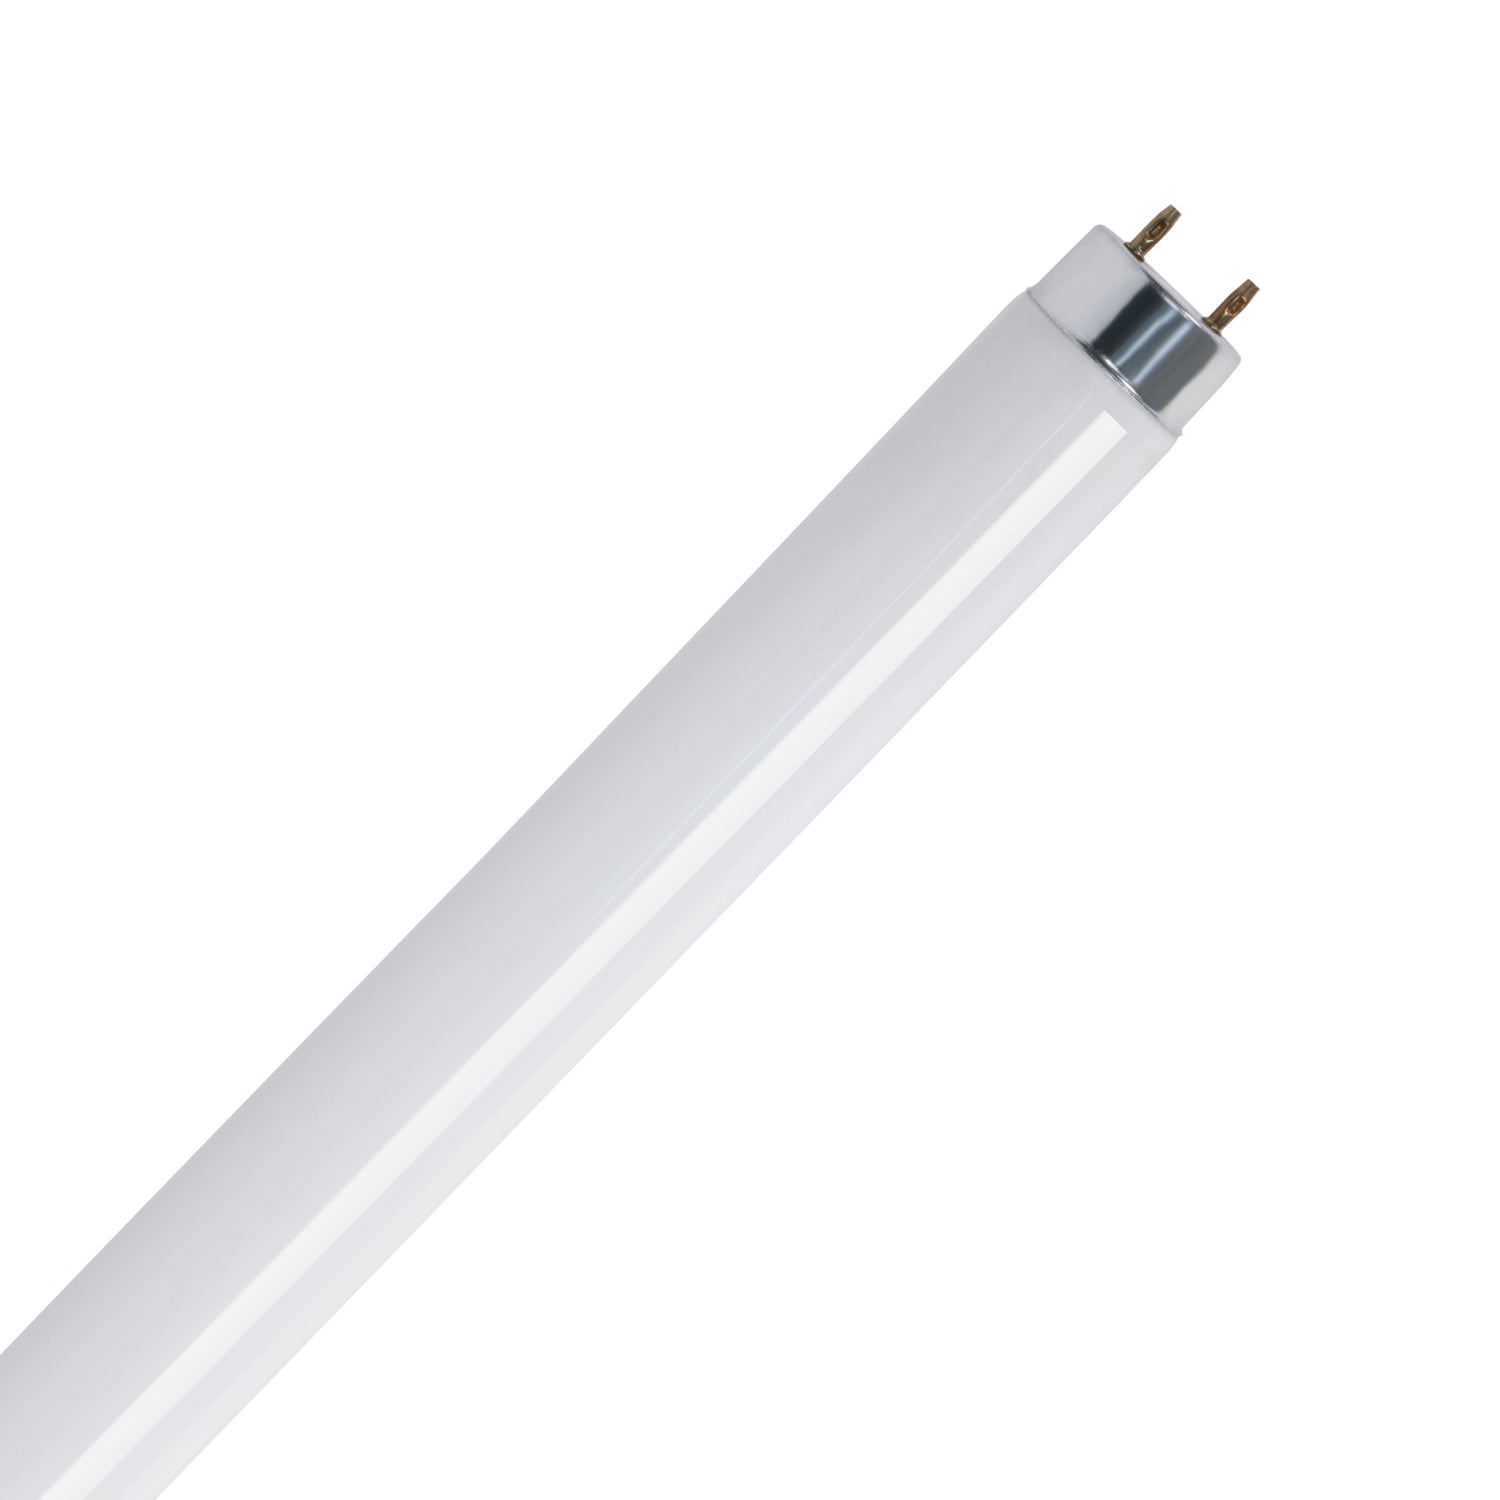 18 in. 15W Cool White (4100K) G13 Base (T8 Replacement) Fluorescent Linear Light Tube